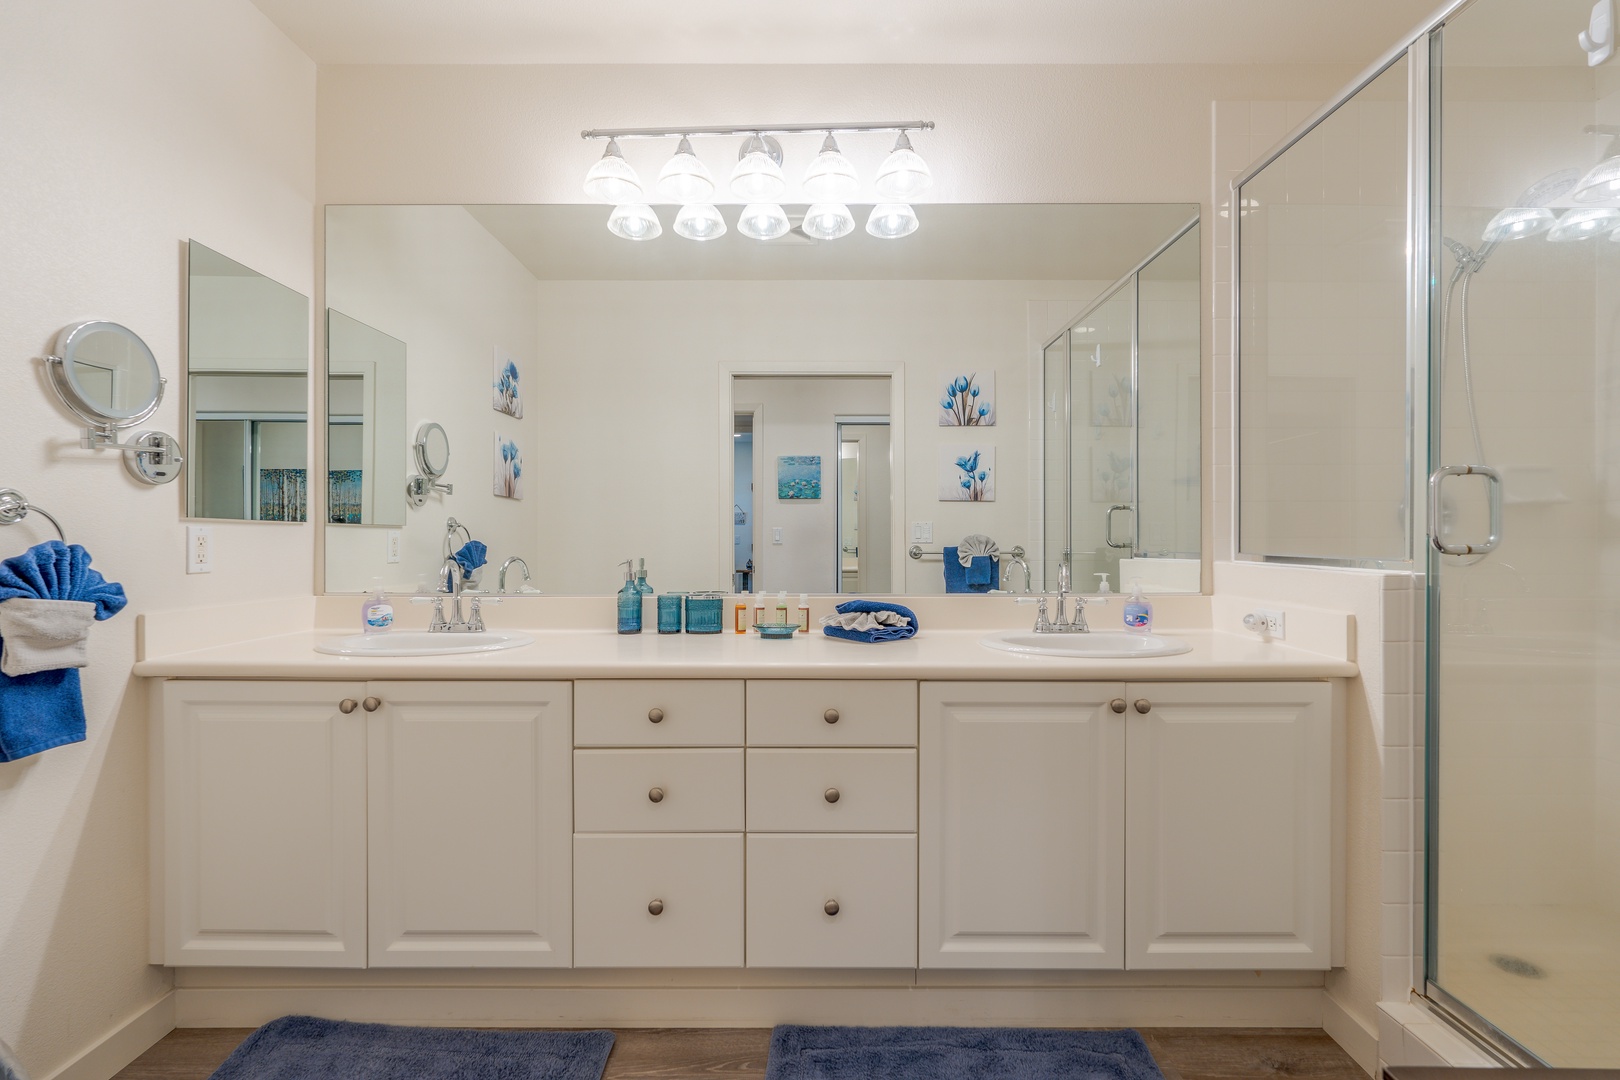 Kapolei Vacation Rentals, Coconut Plantation 1208-2 - The spacious guest bathroom with a large vanity and ample lighting.